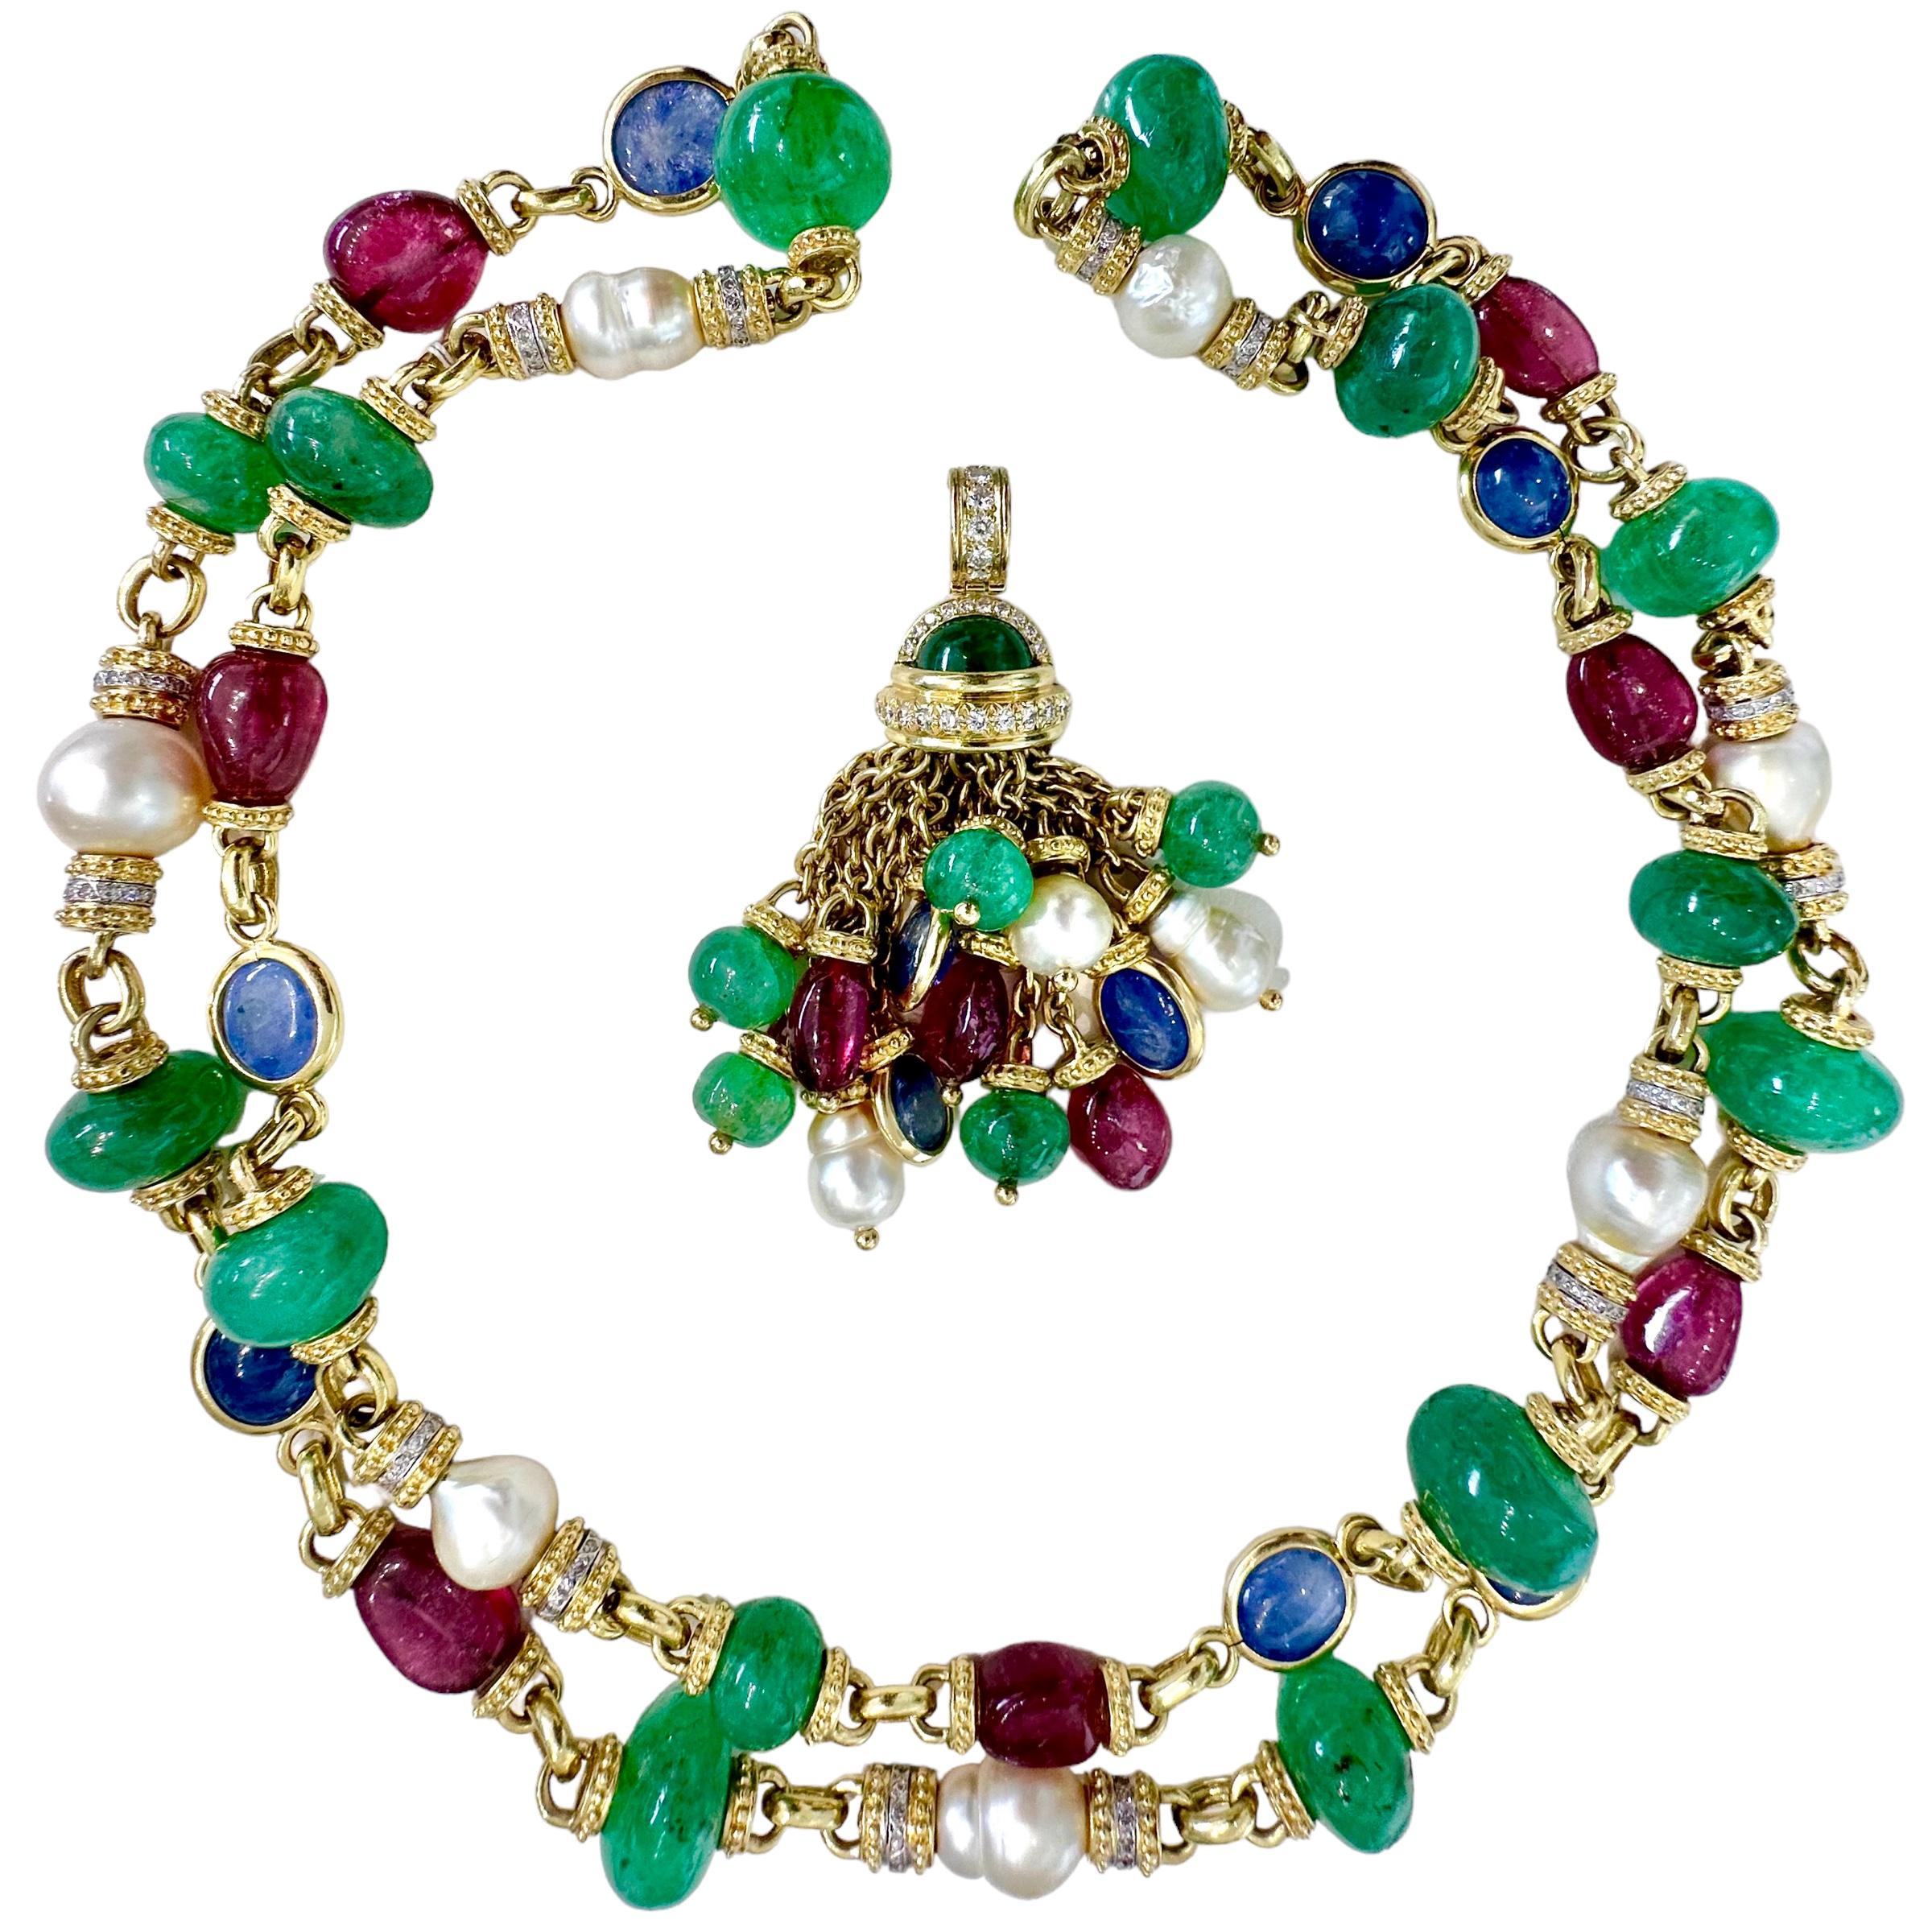 Modern Vintage 40 Inch Long Gold, Diamond & Multicolor Stone Necklace by Tambetti For Sale